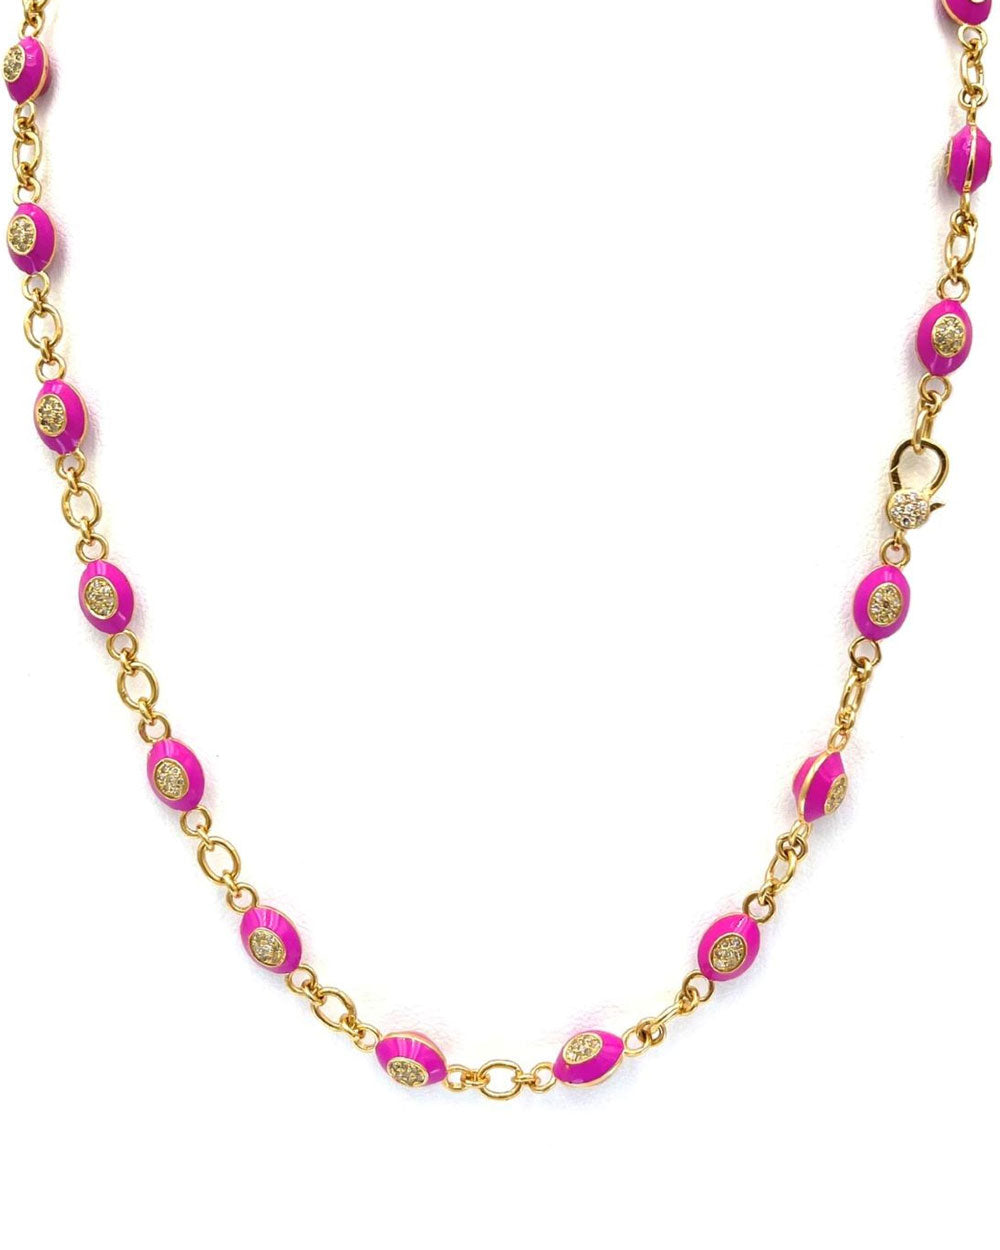 Plated Gold Pink Beaded Link Necklace with Diamonds